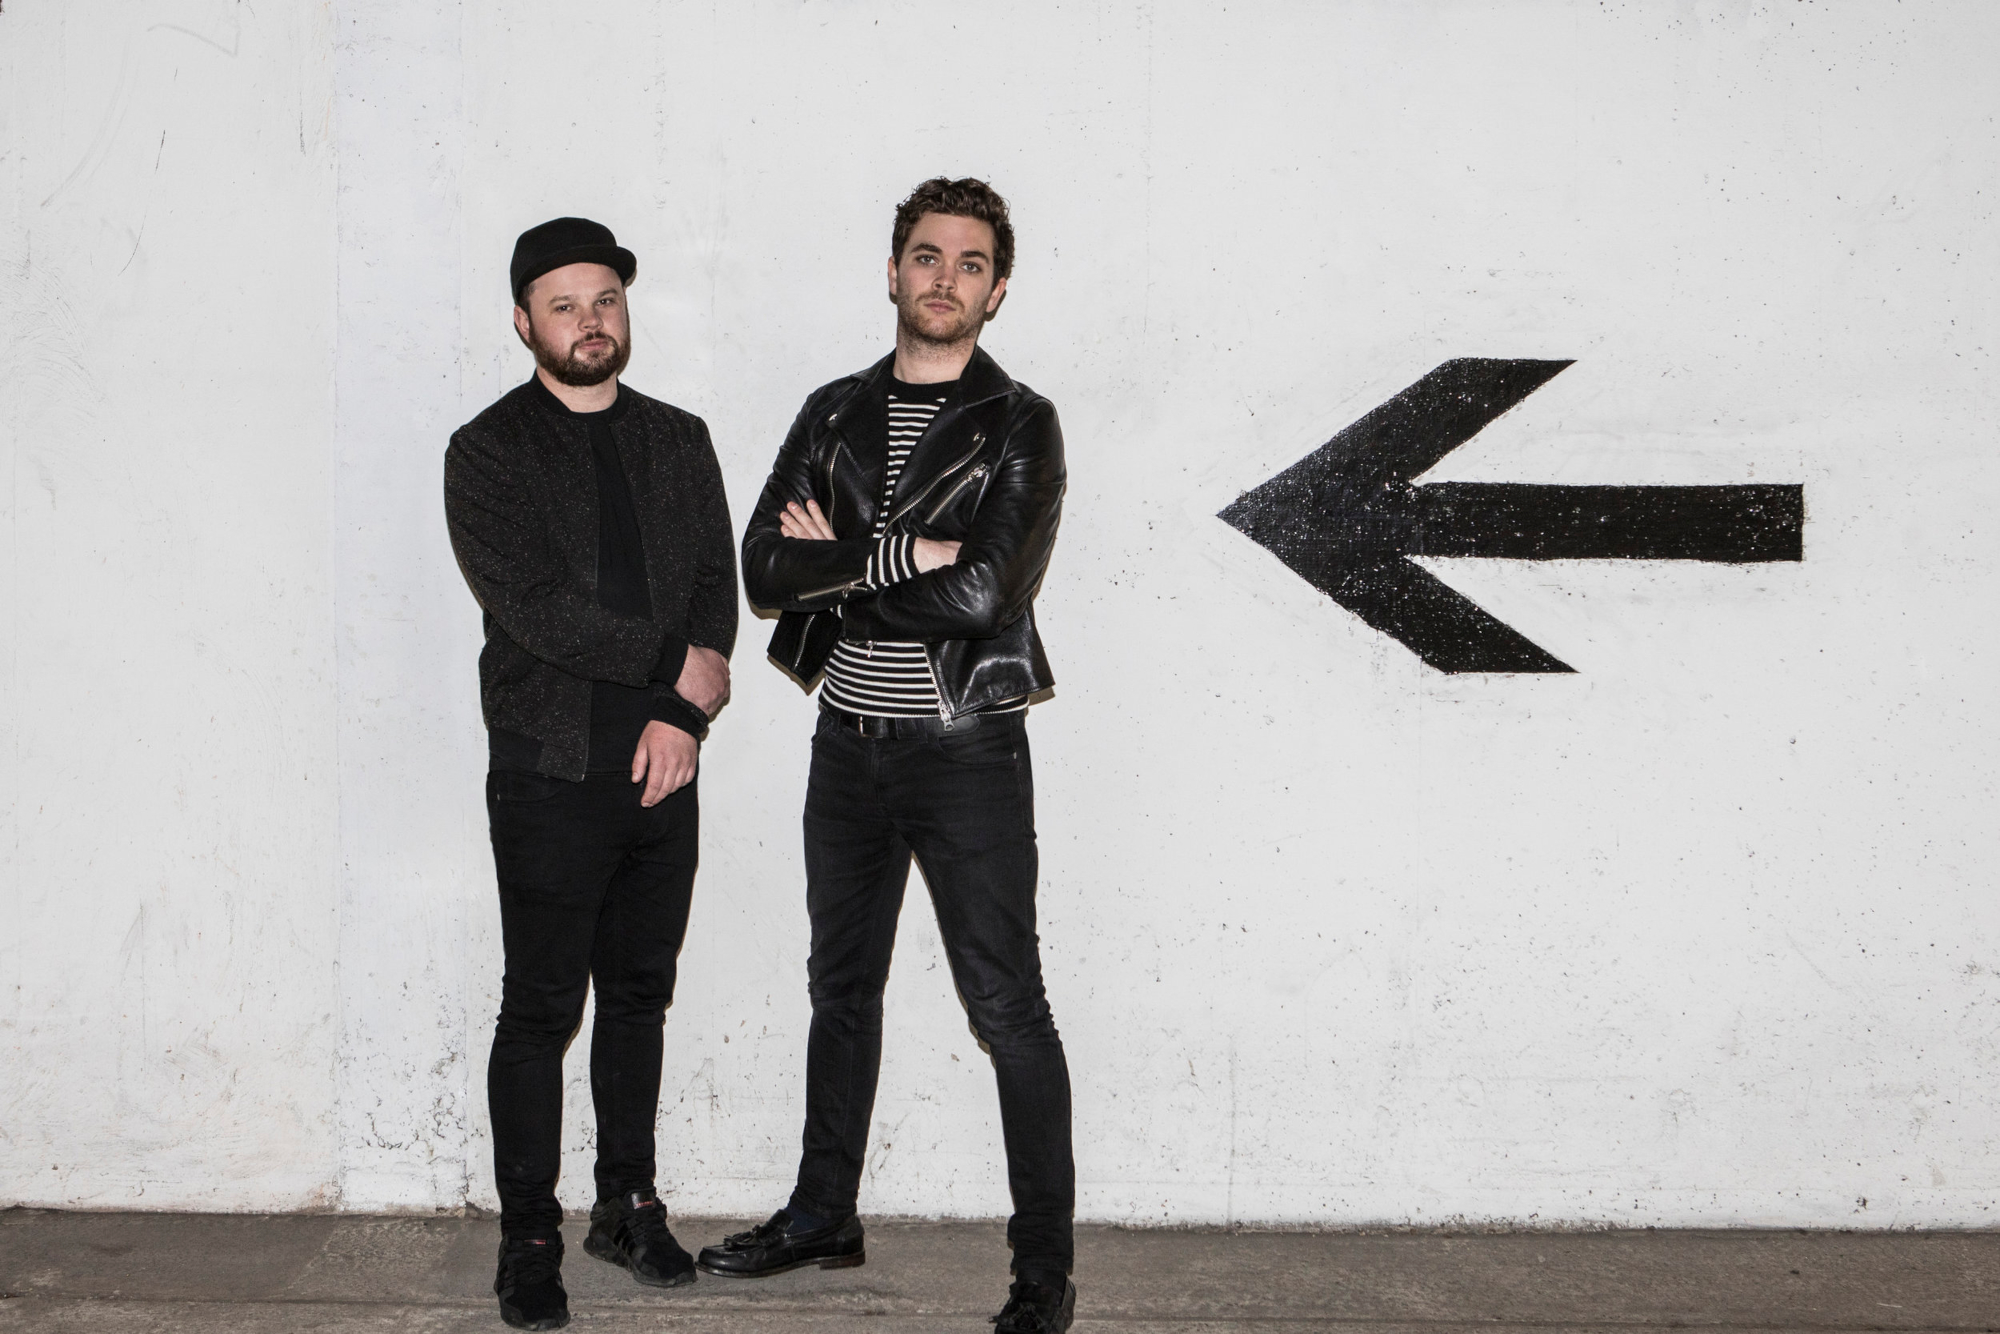 HD wallpaper of two band members from Royal Blood standing against a white wall with a large black arrow pointing left.